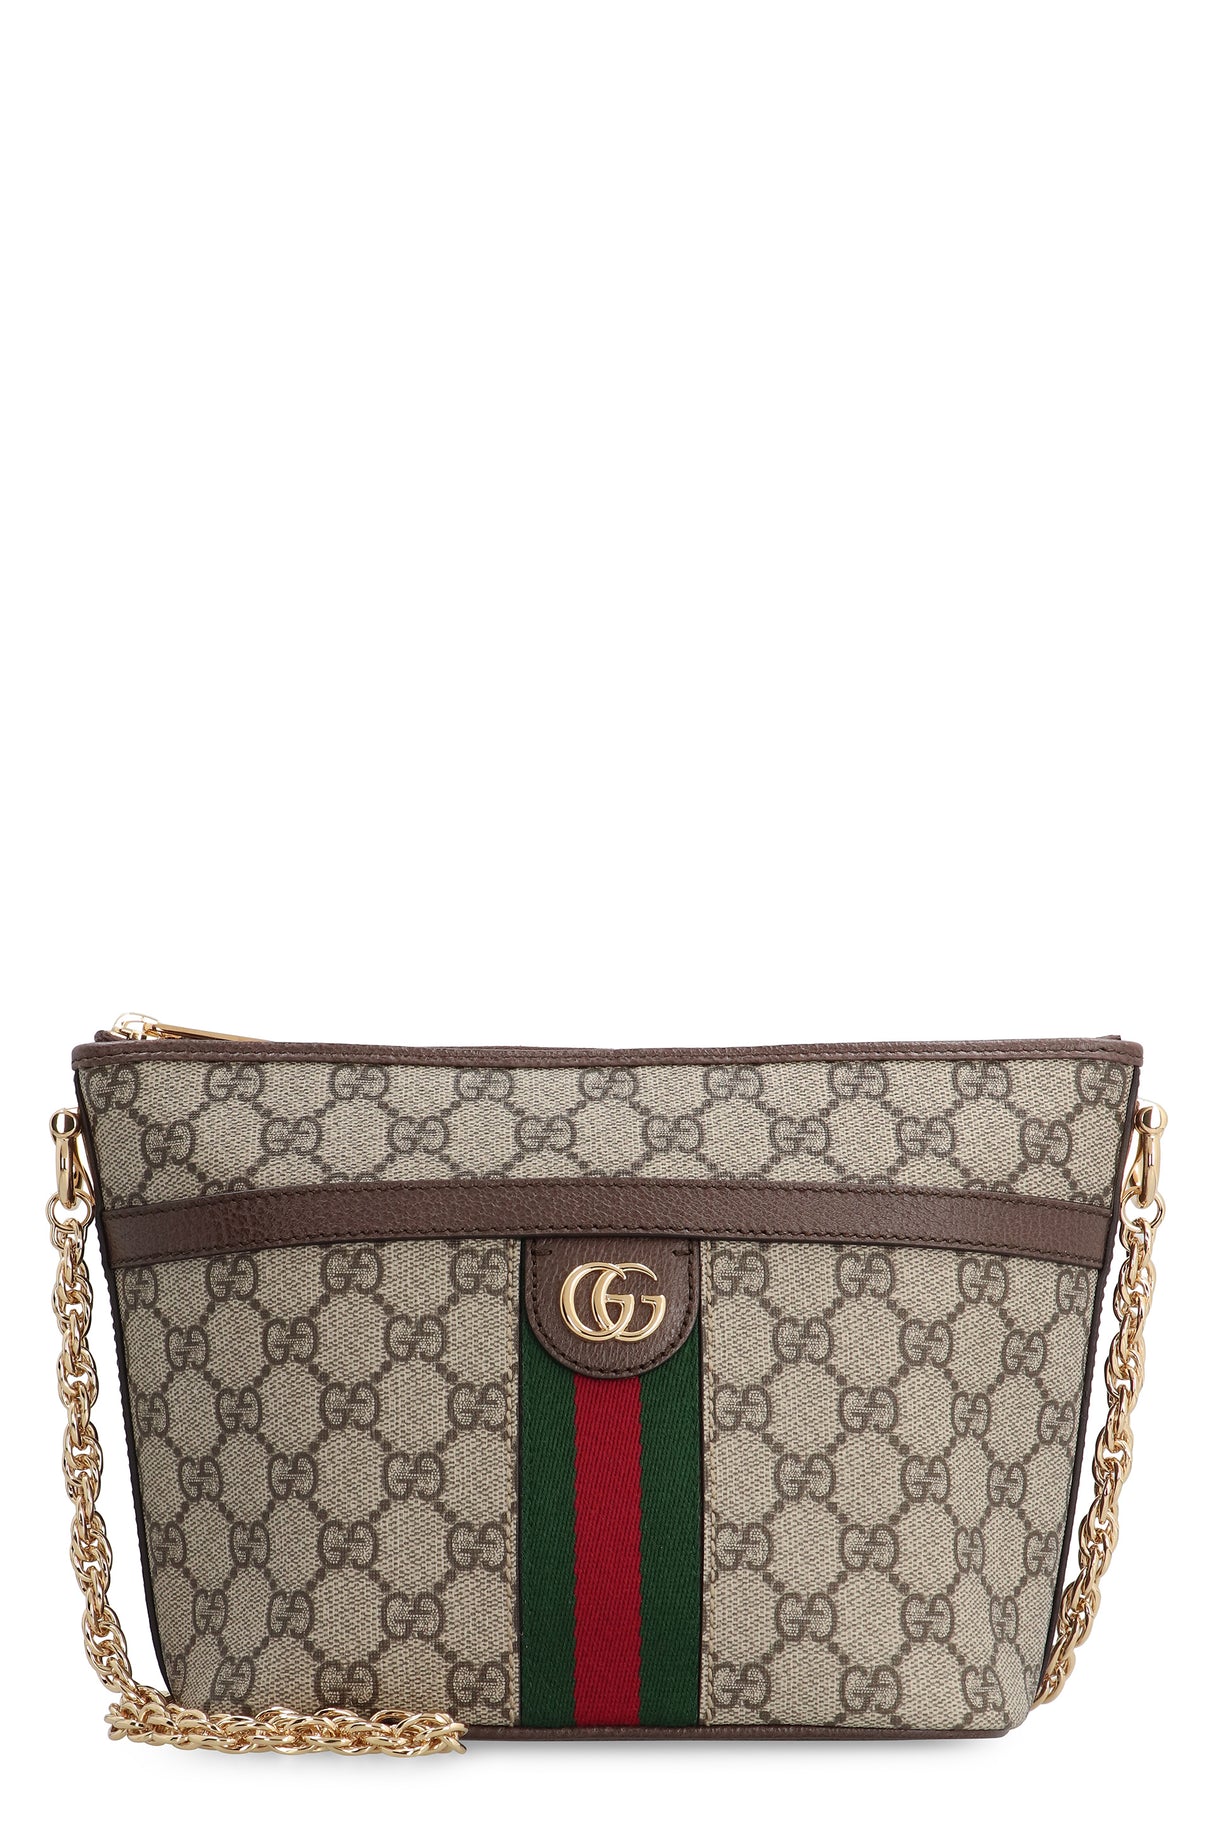 GUCCI Mini Classic Chain-Strap Shoulder Bag in Tan with Green-Red Stripe and Gold-Tone Accents